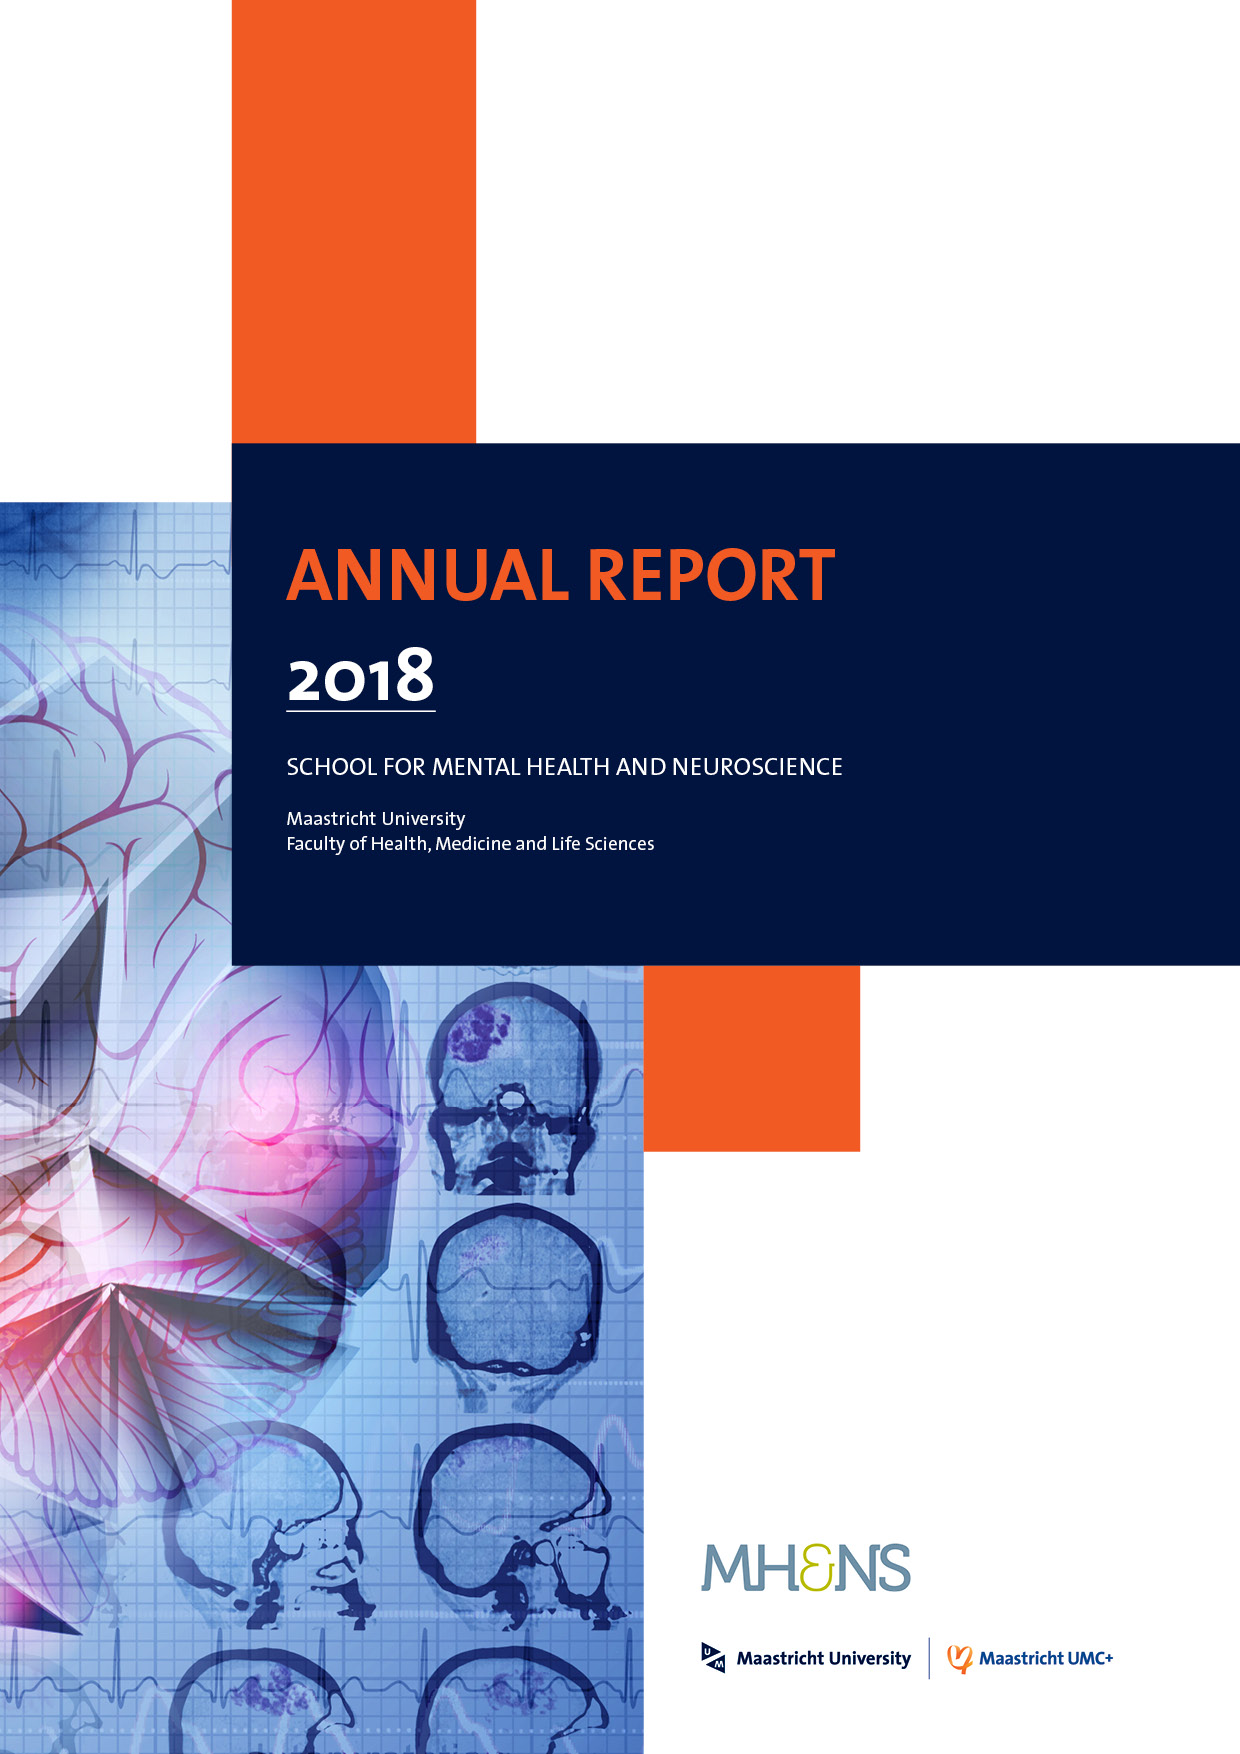 MHeNs Annual Report 2018